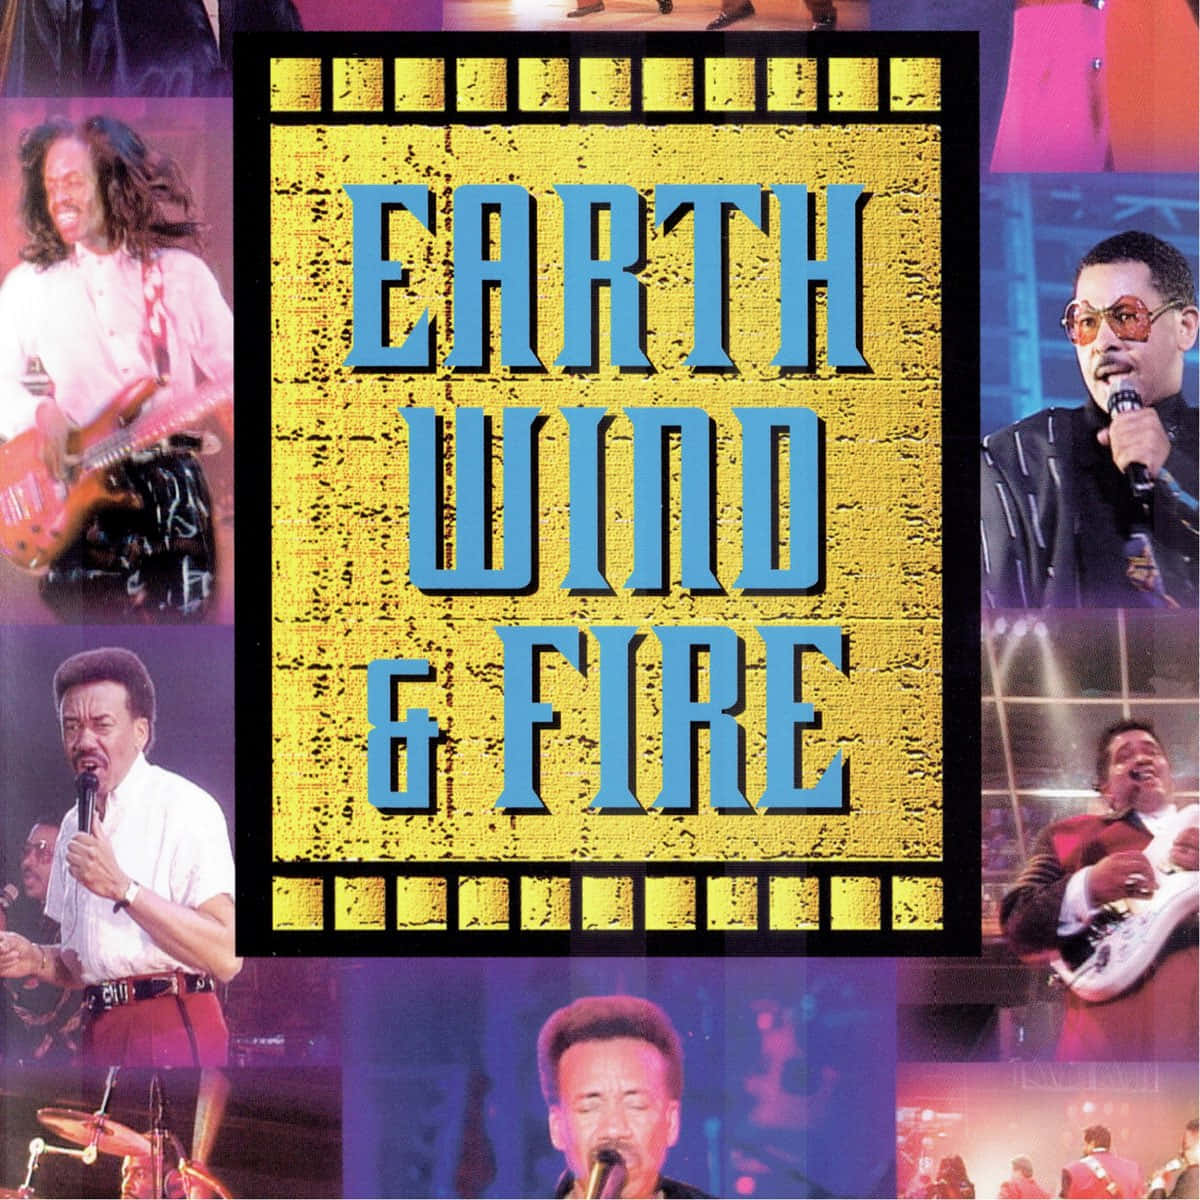 Captivating Earth, Wind, And Fire Artwork Wallpaper